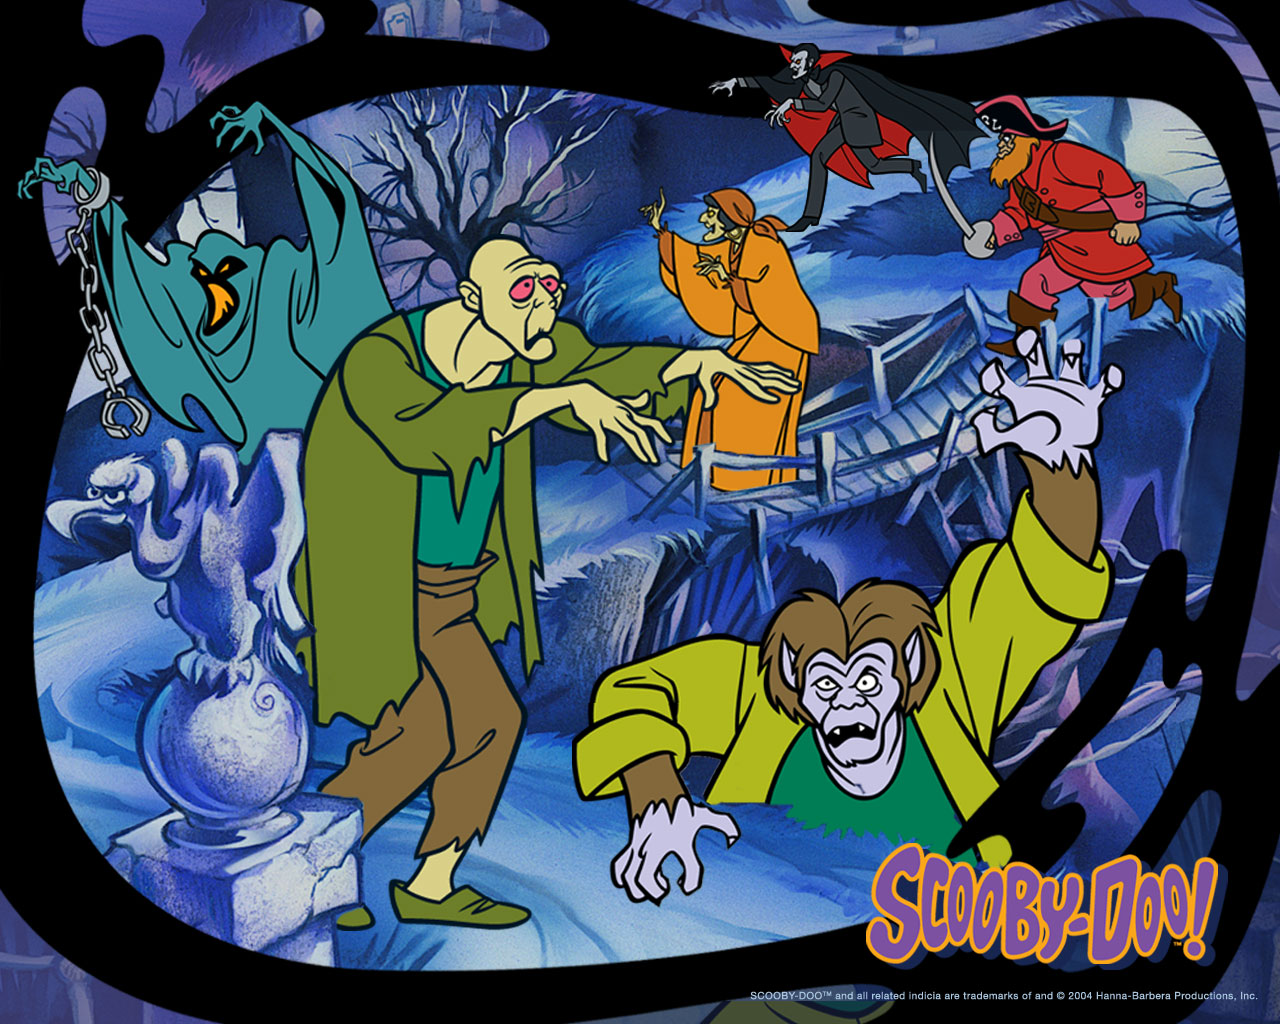 Villains from Scooby Doo Wallpaper.